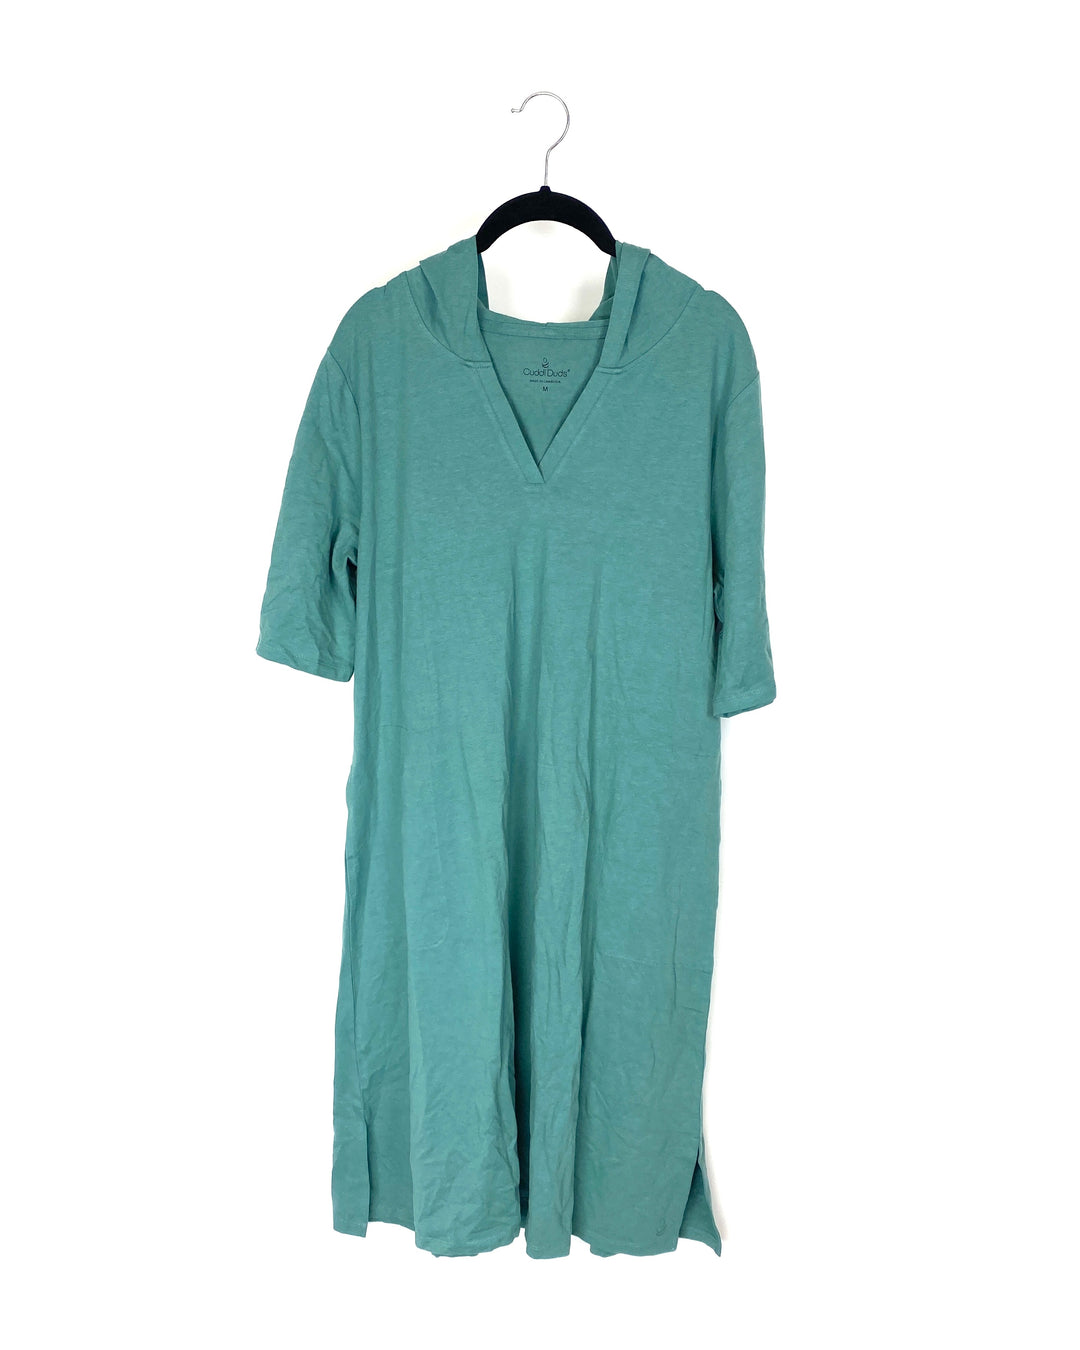 Teal Hooded Dress - Size 8/10